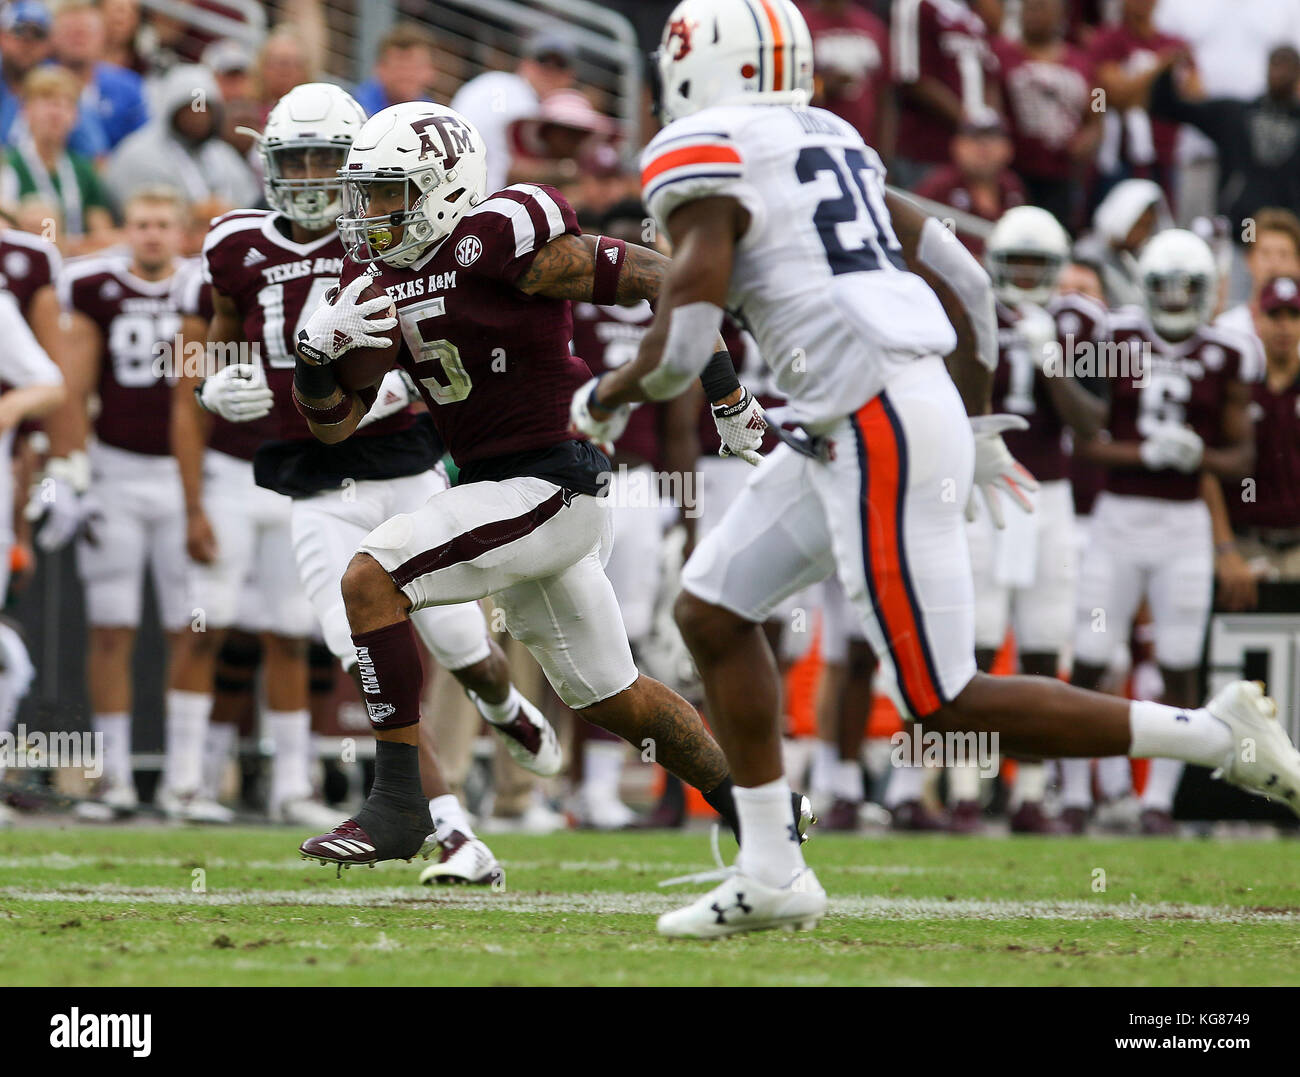 November 4, 2017: Texas A&M Aggies running back Trayveon Williams (5) rushes for yards in the second quarter during the NCAA football game between the Auburn Tigers and the Texas A&M Aggies at Kyle Field in College Station, TX; John Glaser/CSM. Stock Photo